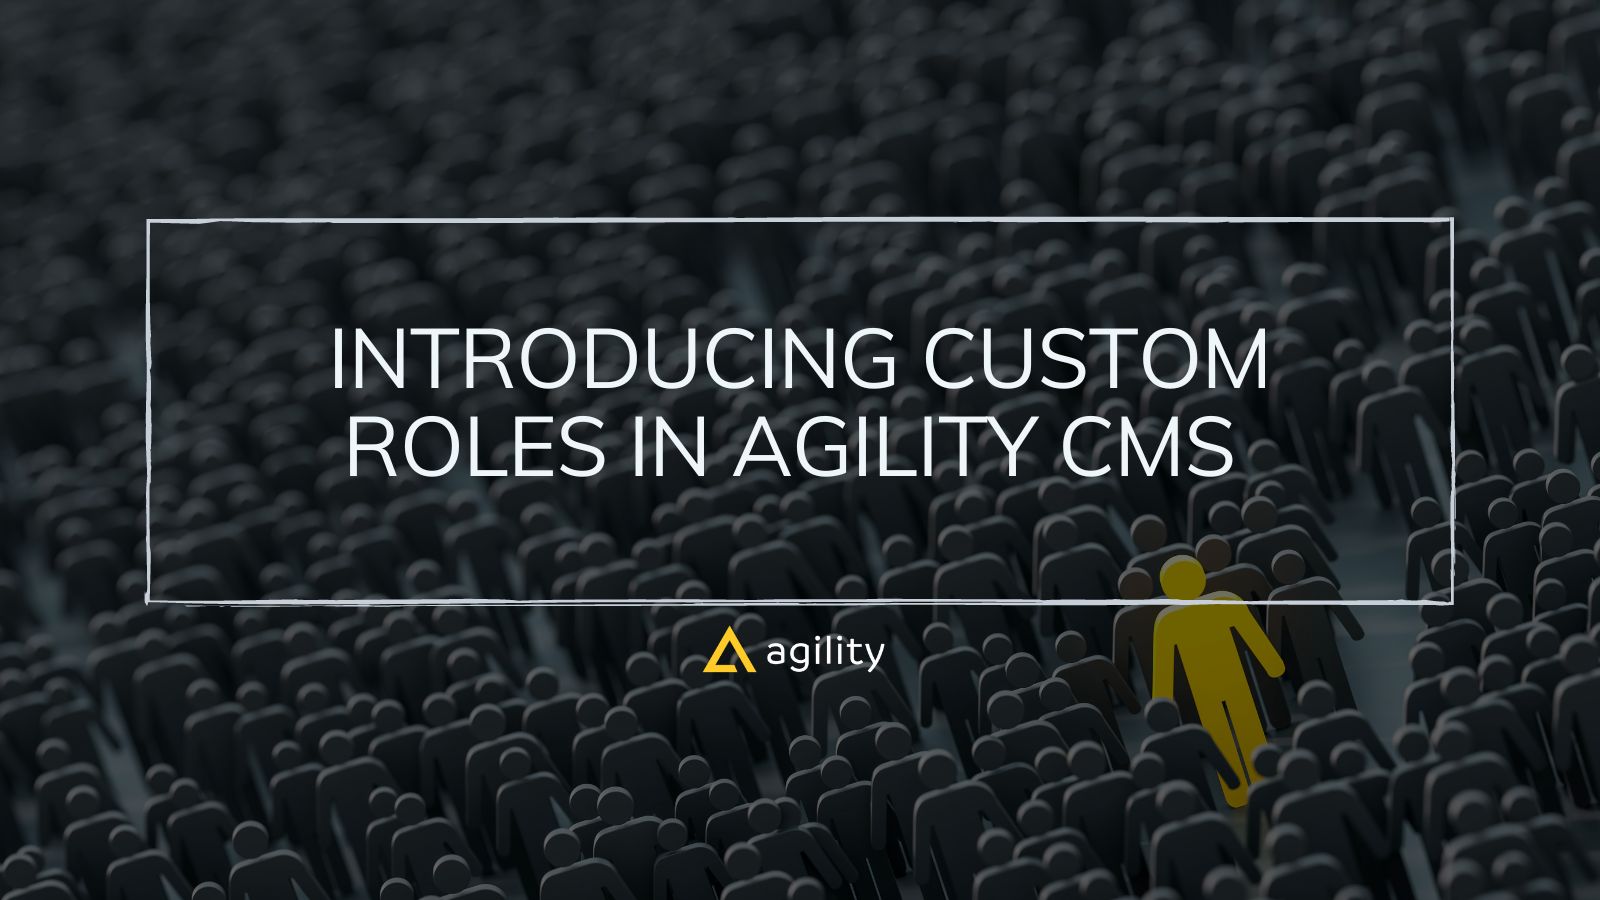 Introducing Custom Roles in Agility CMS